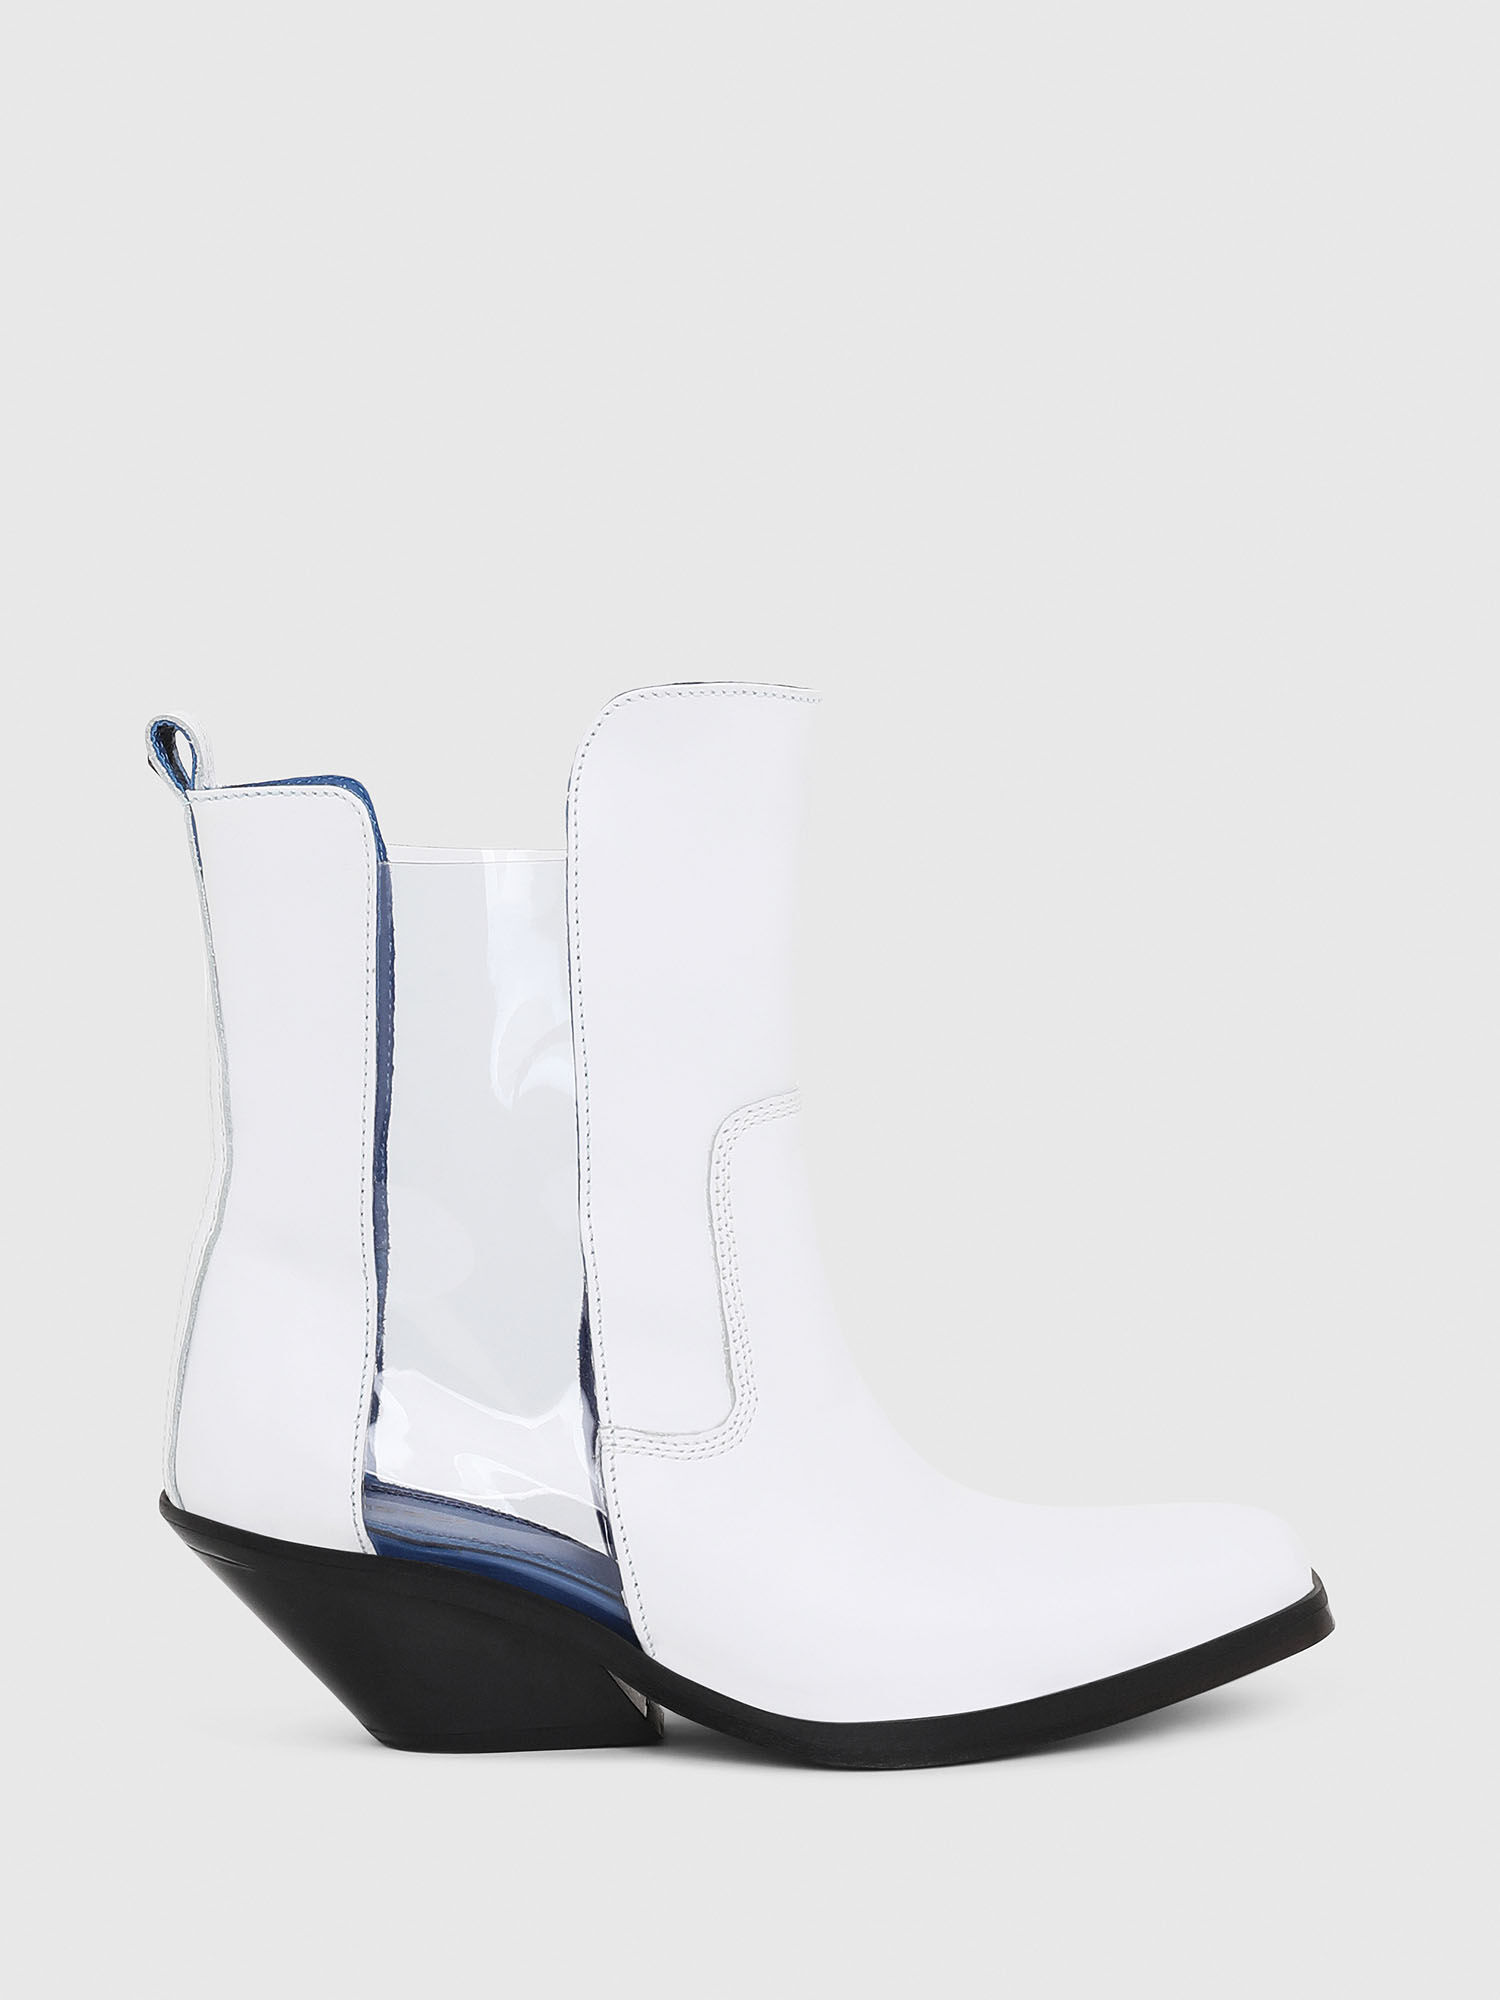 white ankle boots cowboy